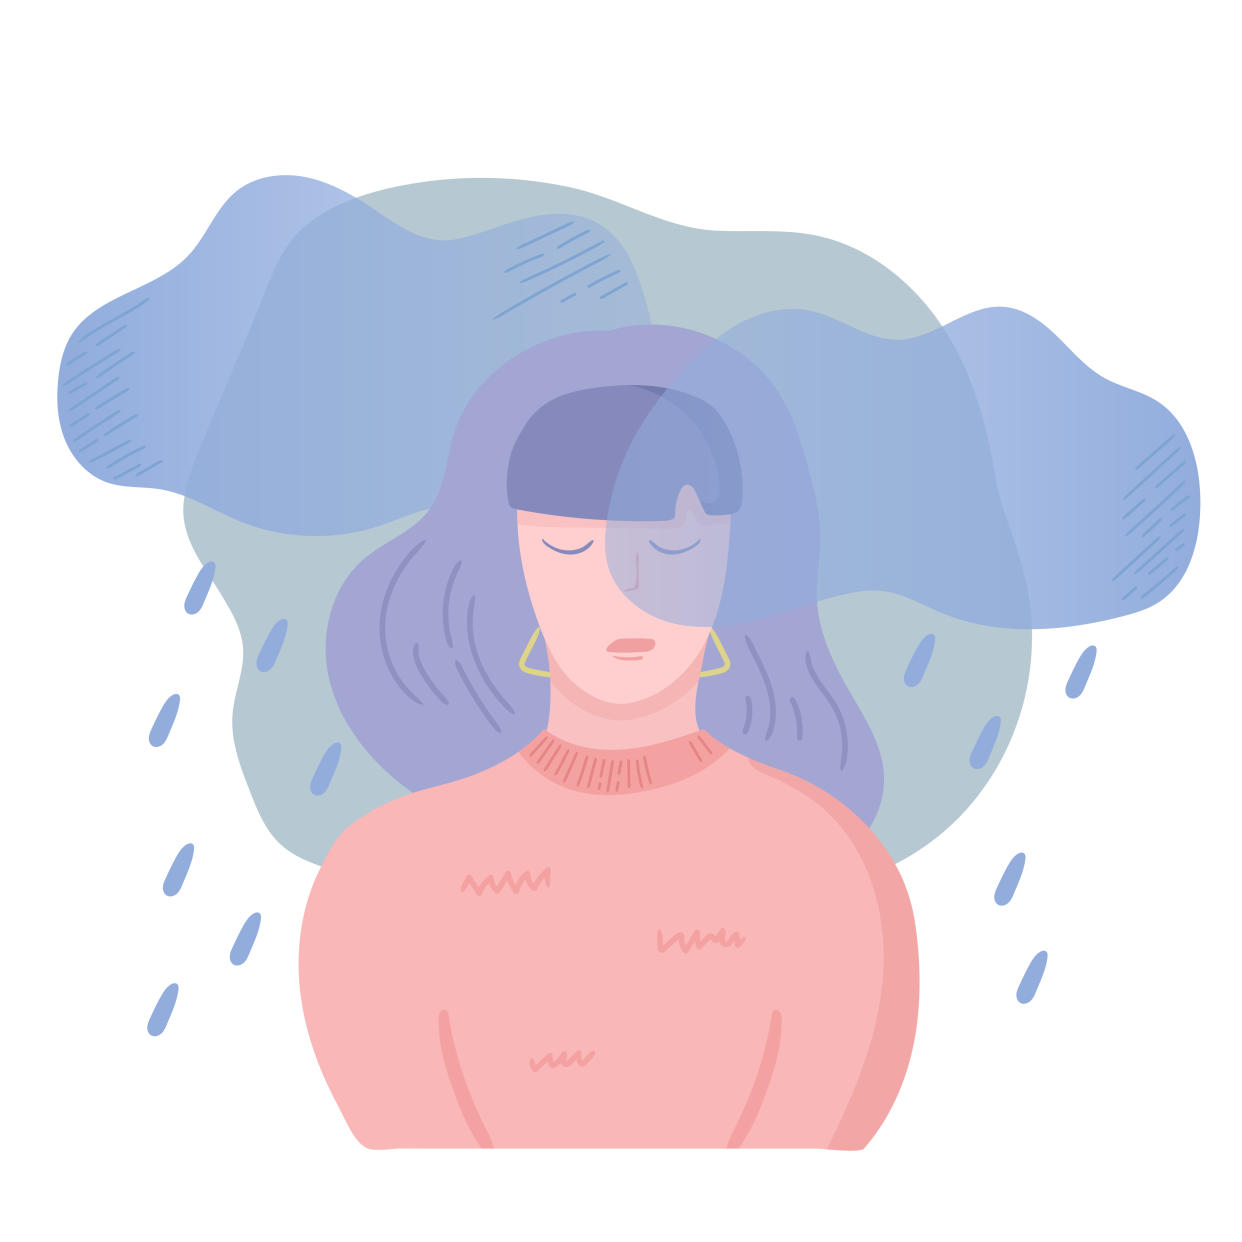 Sad unhappy girl. Depression, apathy and bad mood concept. Dark clouds and rain above the woman head. Vector illustration, cartoon flat style.